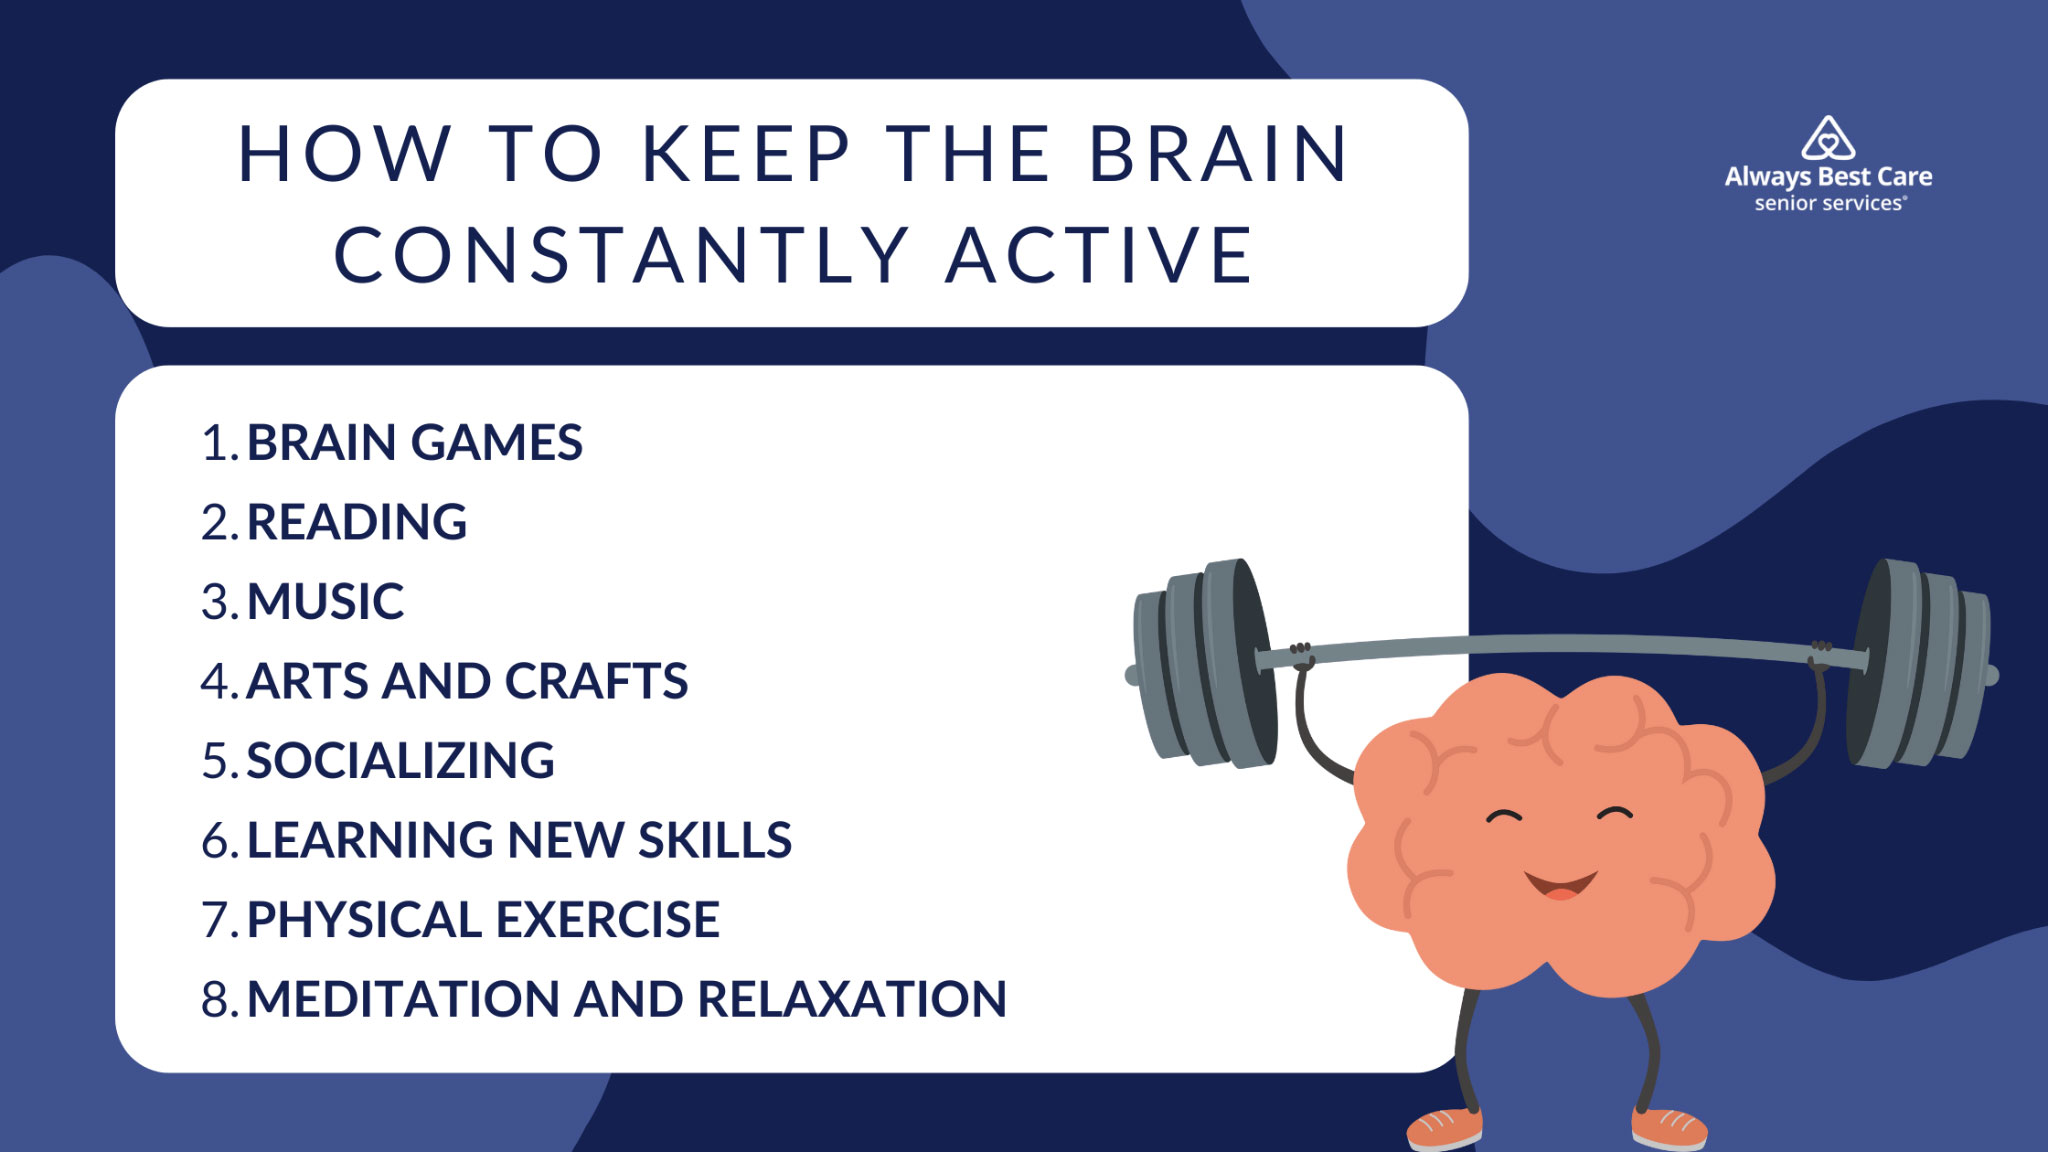 Keep the Brain Constantly Active